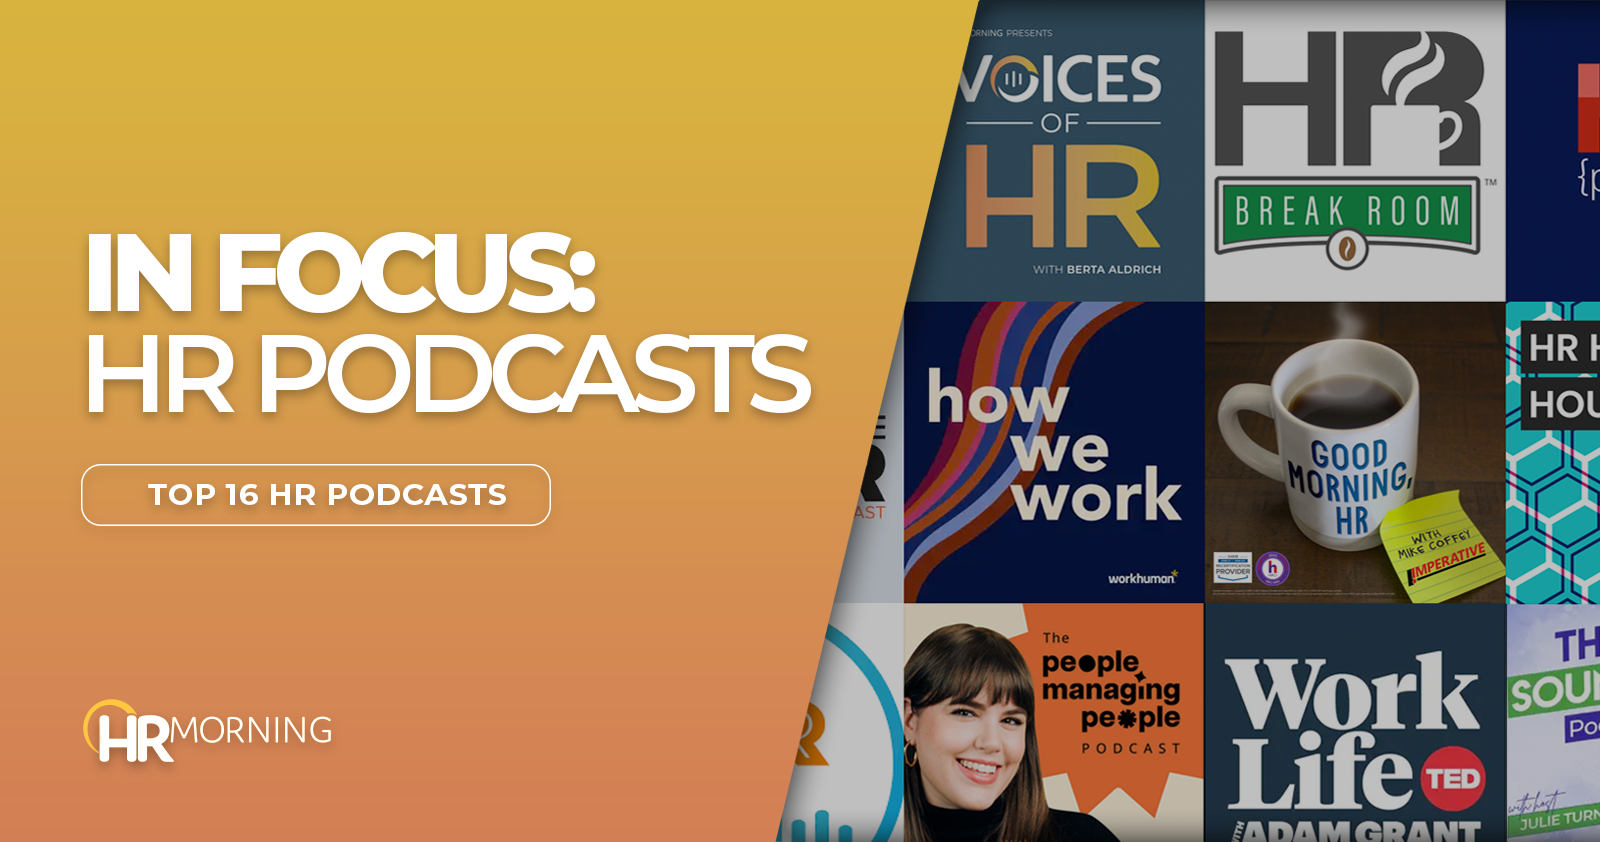 Top 16 HR podcasts – and how to get the most from them